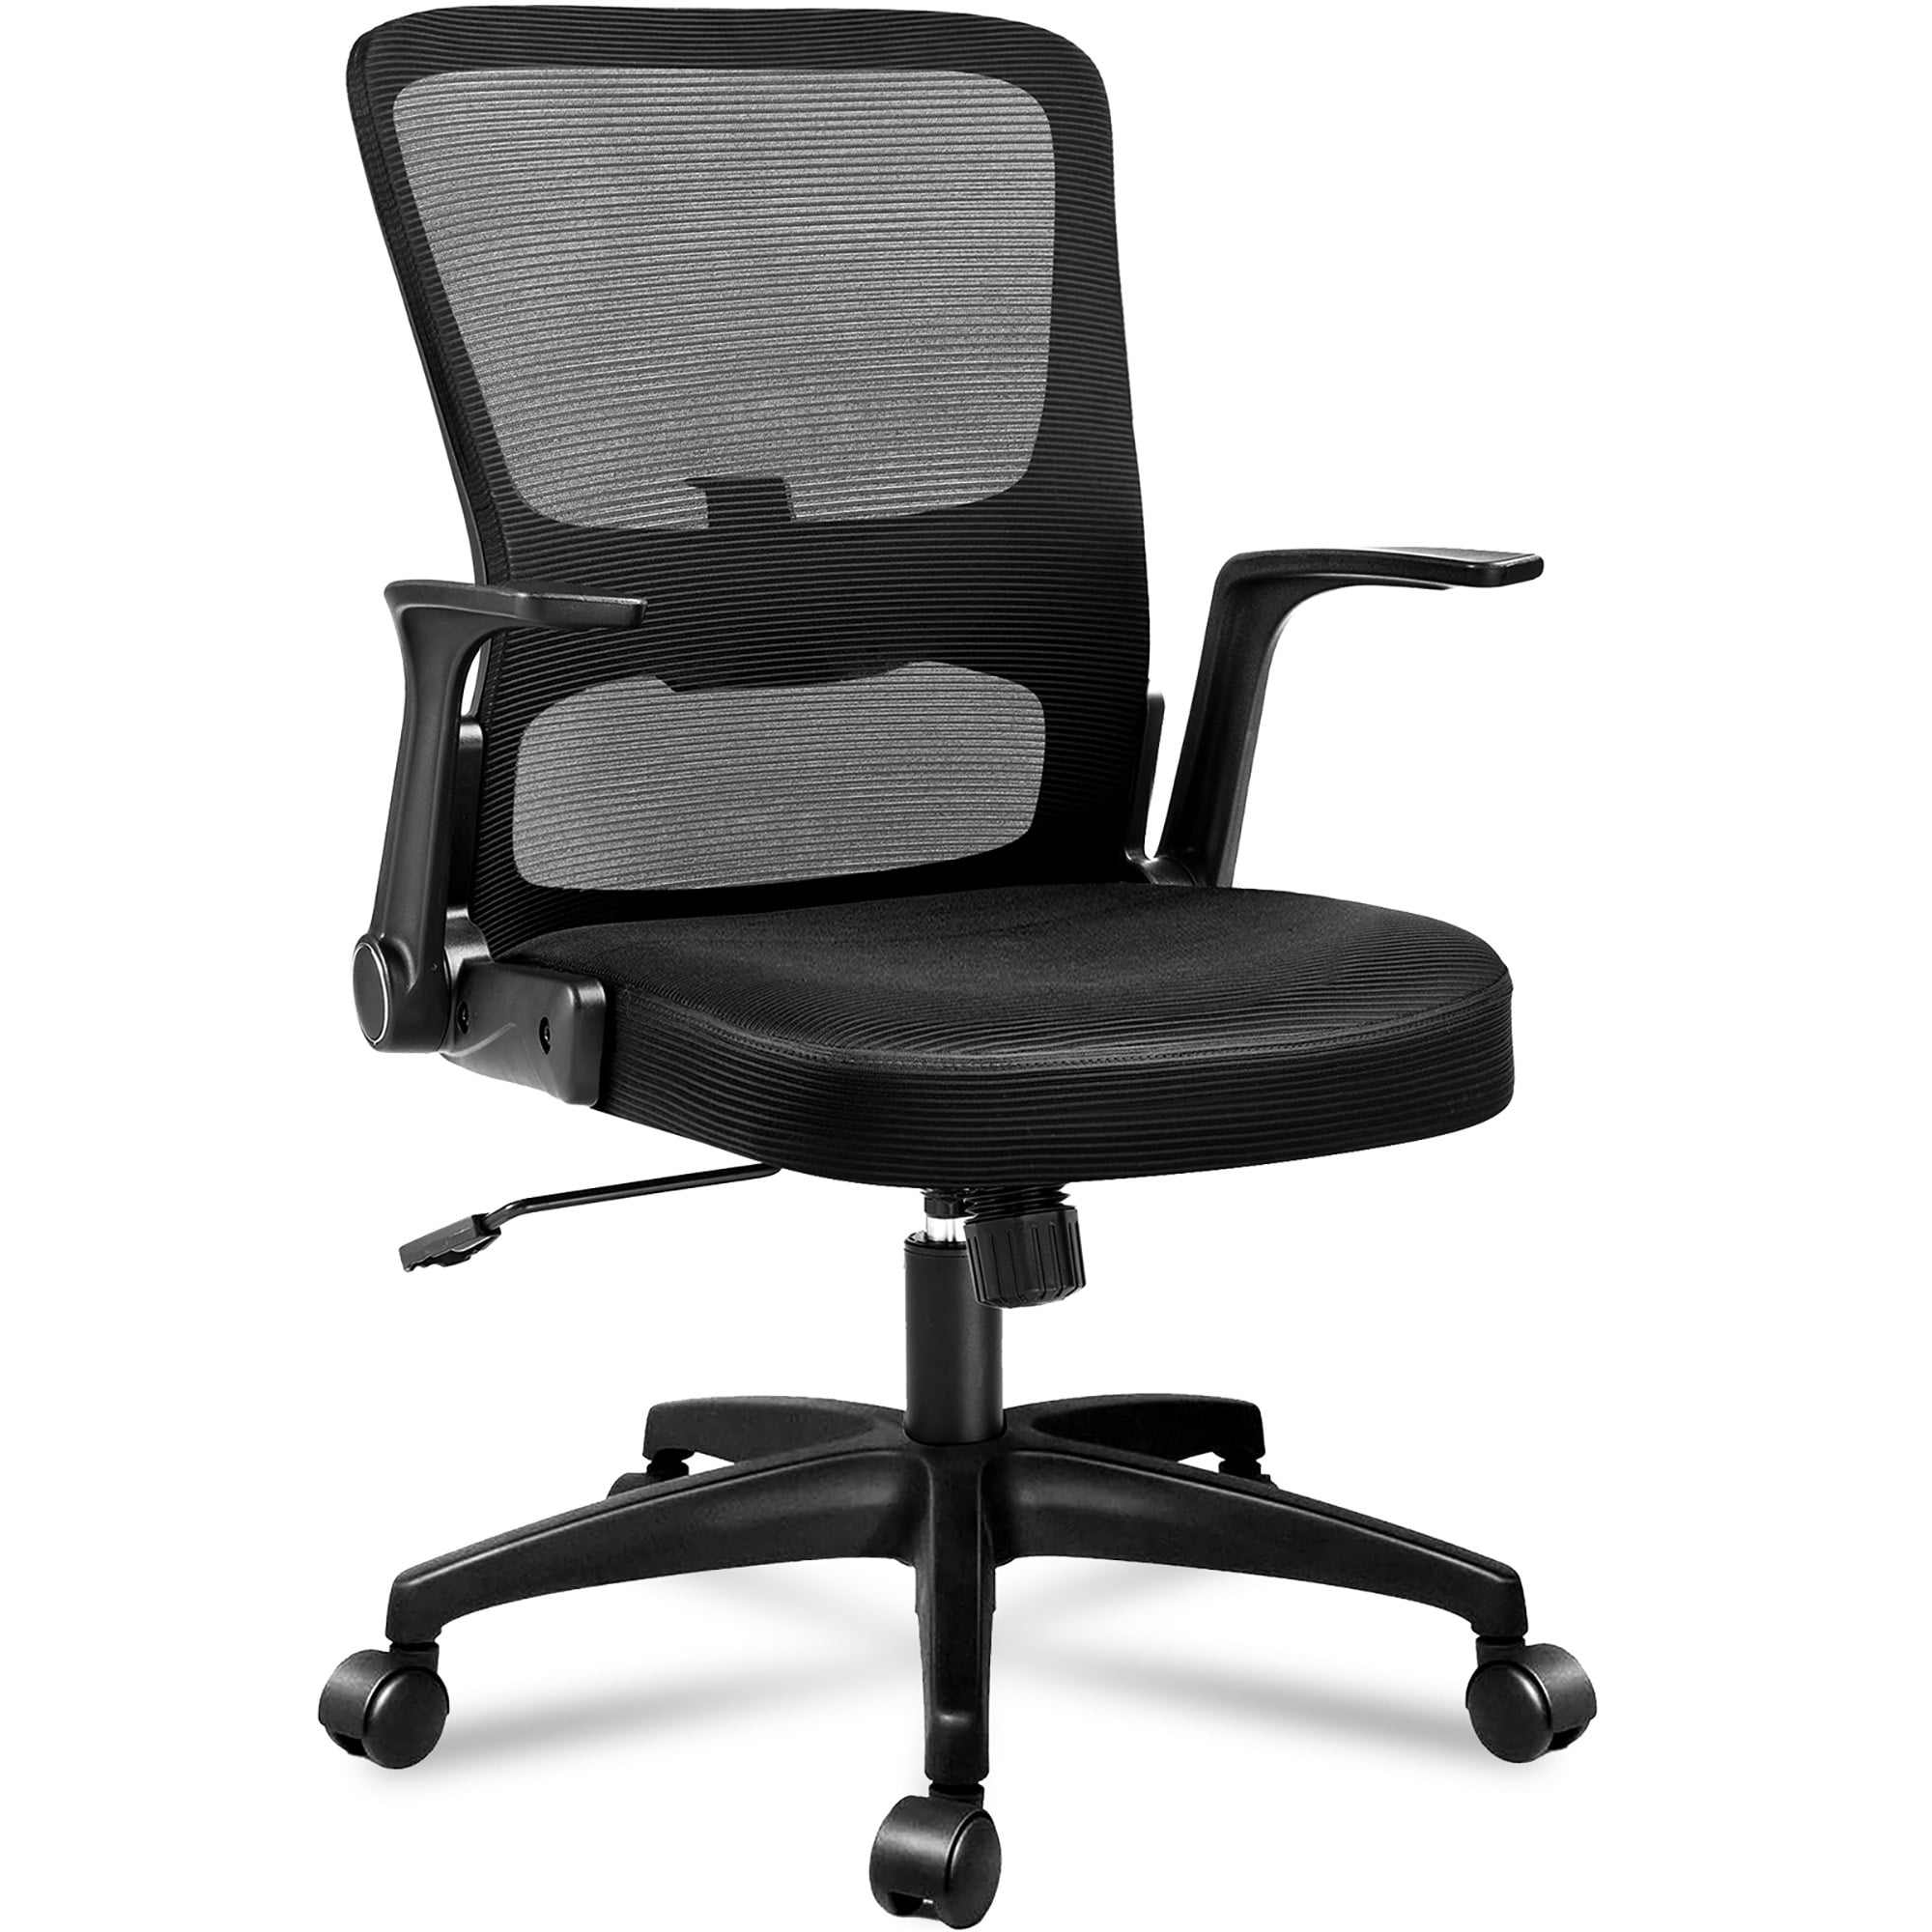 Gray COMHOMA Office Desk Chair Mesh Ergonomic Mid-Back Lumbar Support Computer Swivel Chairs with Flip-Up Armrests & Wheels for Conference Home Office